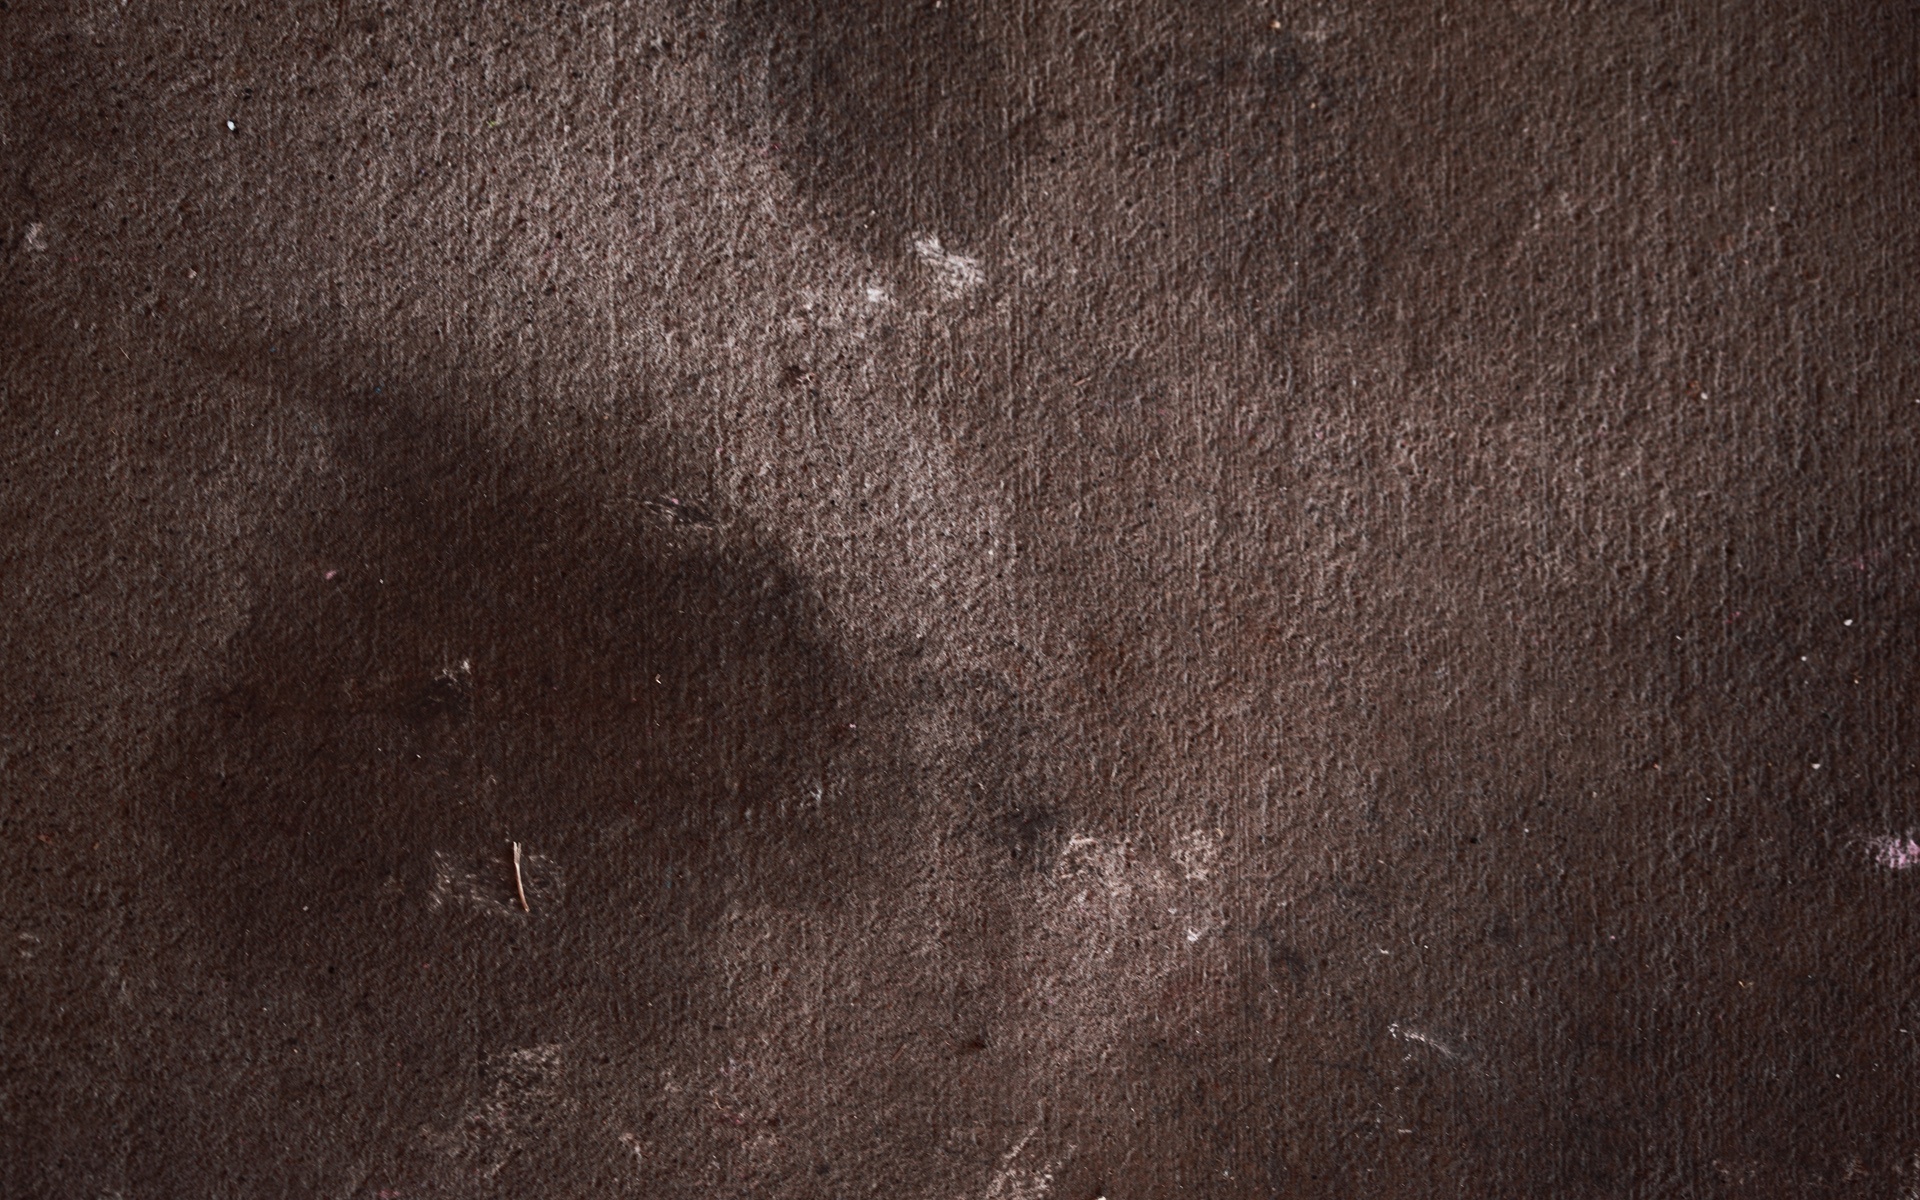 Grungy Cement Stained Dirty Wallpaper Textured